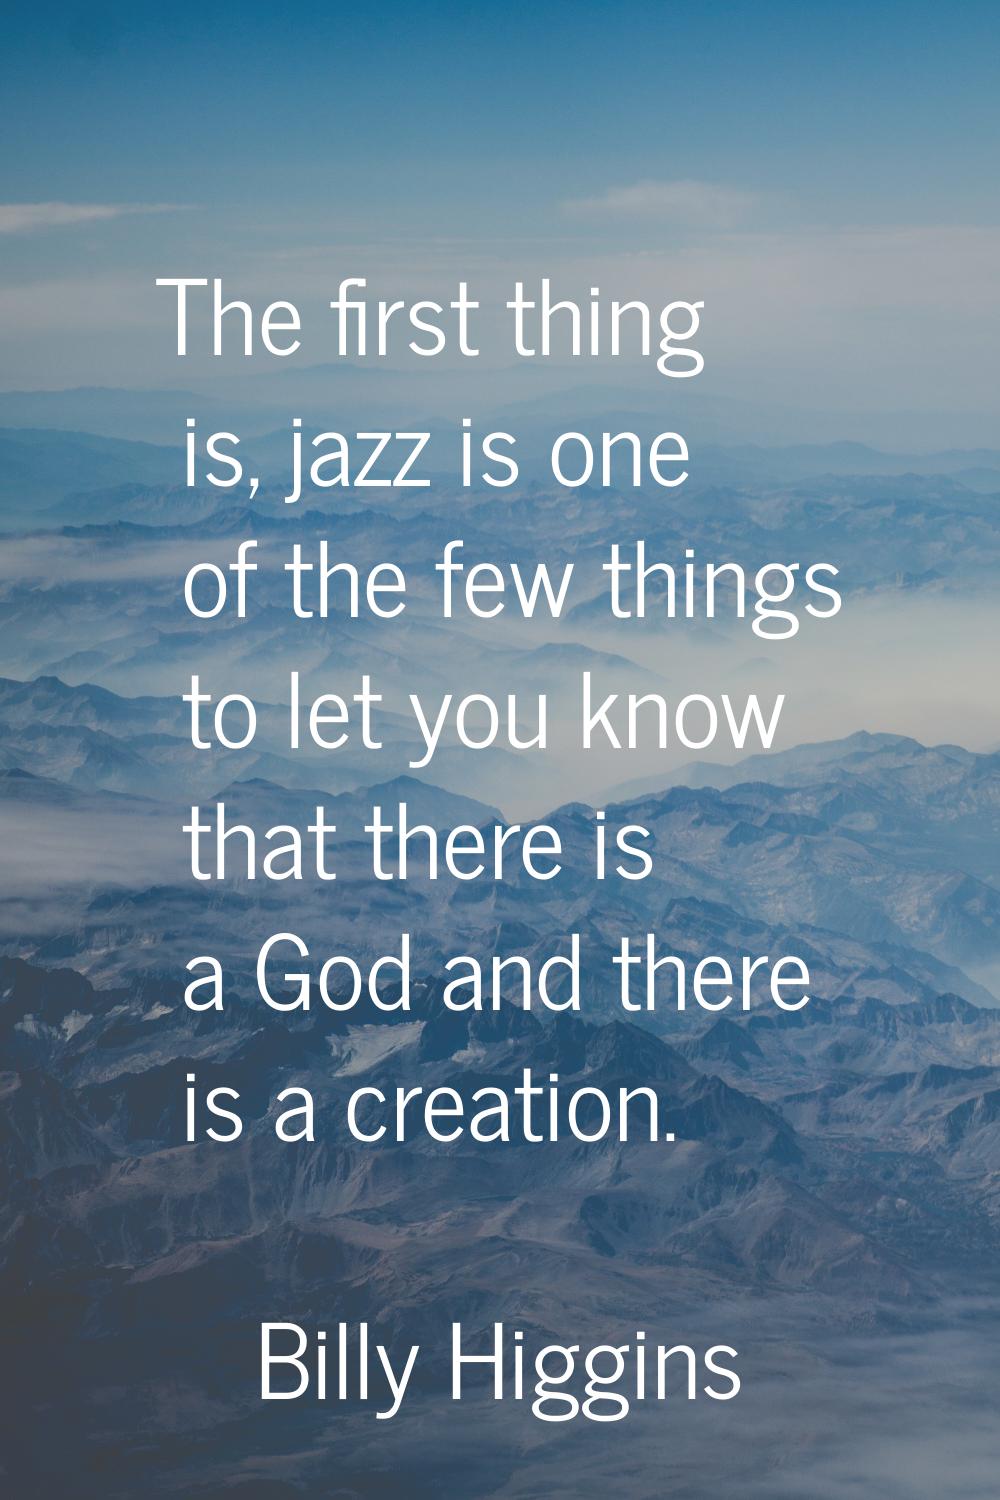 The first thing is, jazz is one of the few things to let you know that there is a God and there is 